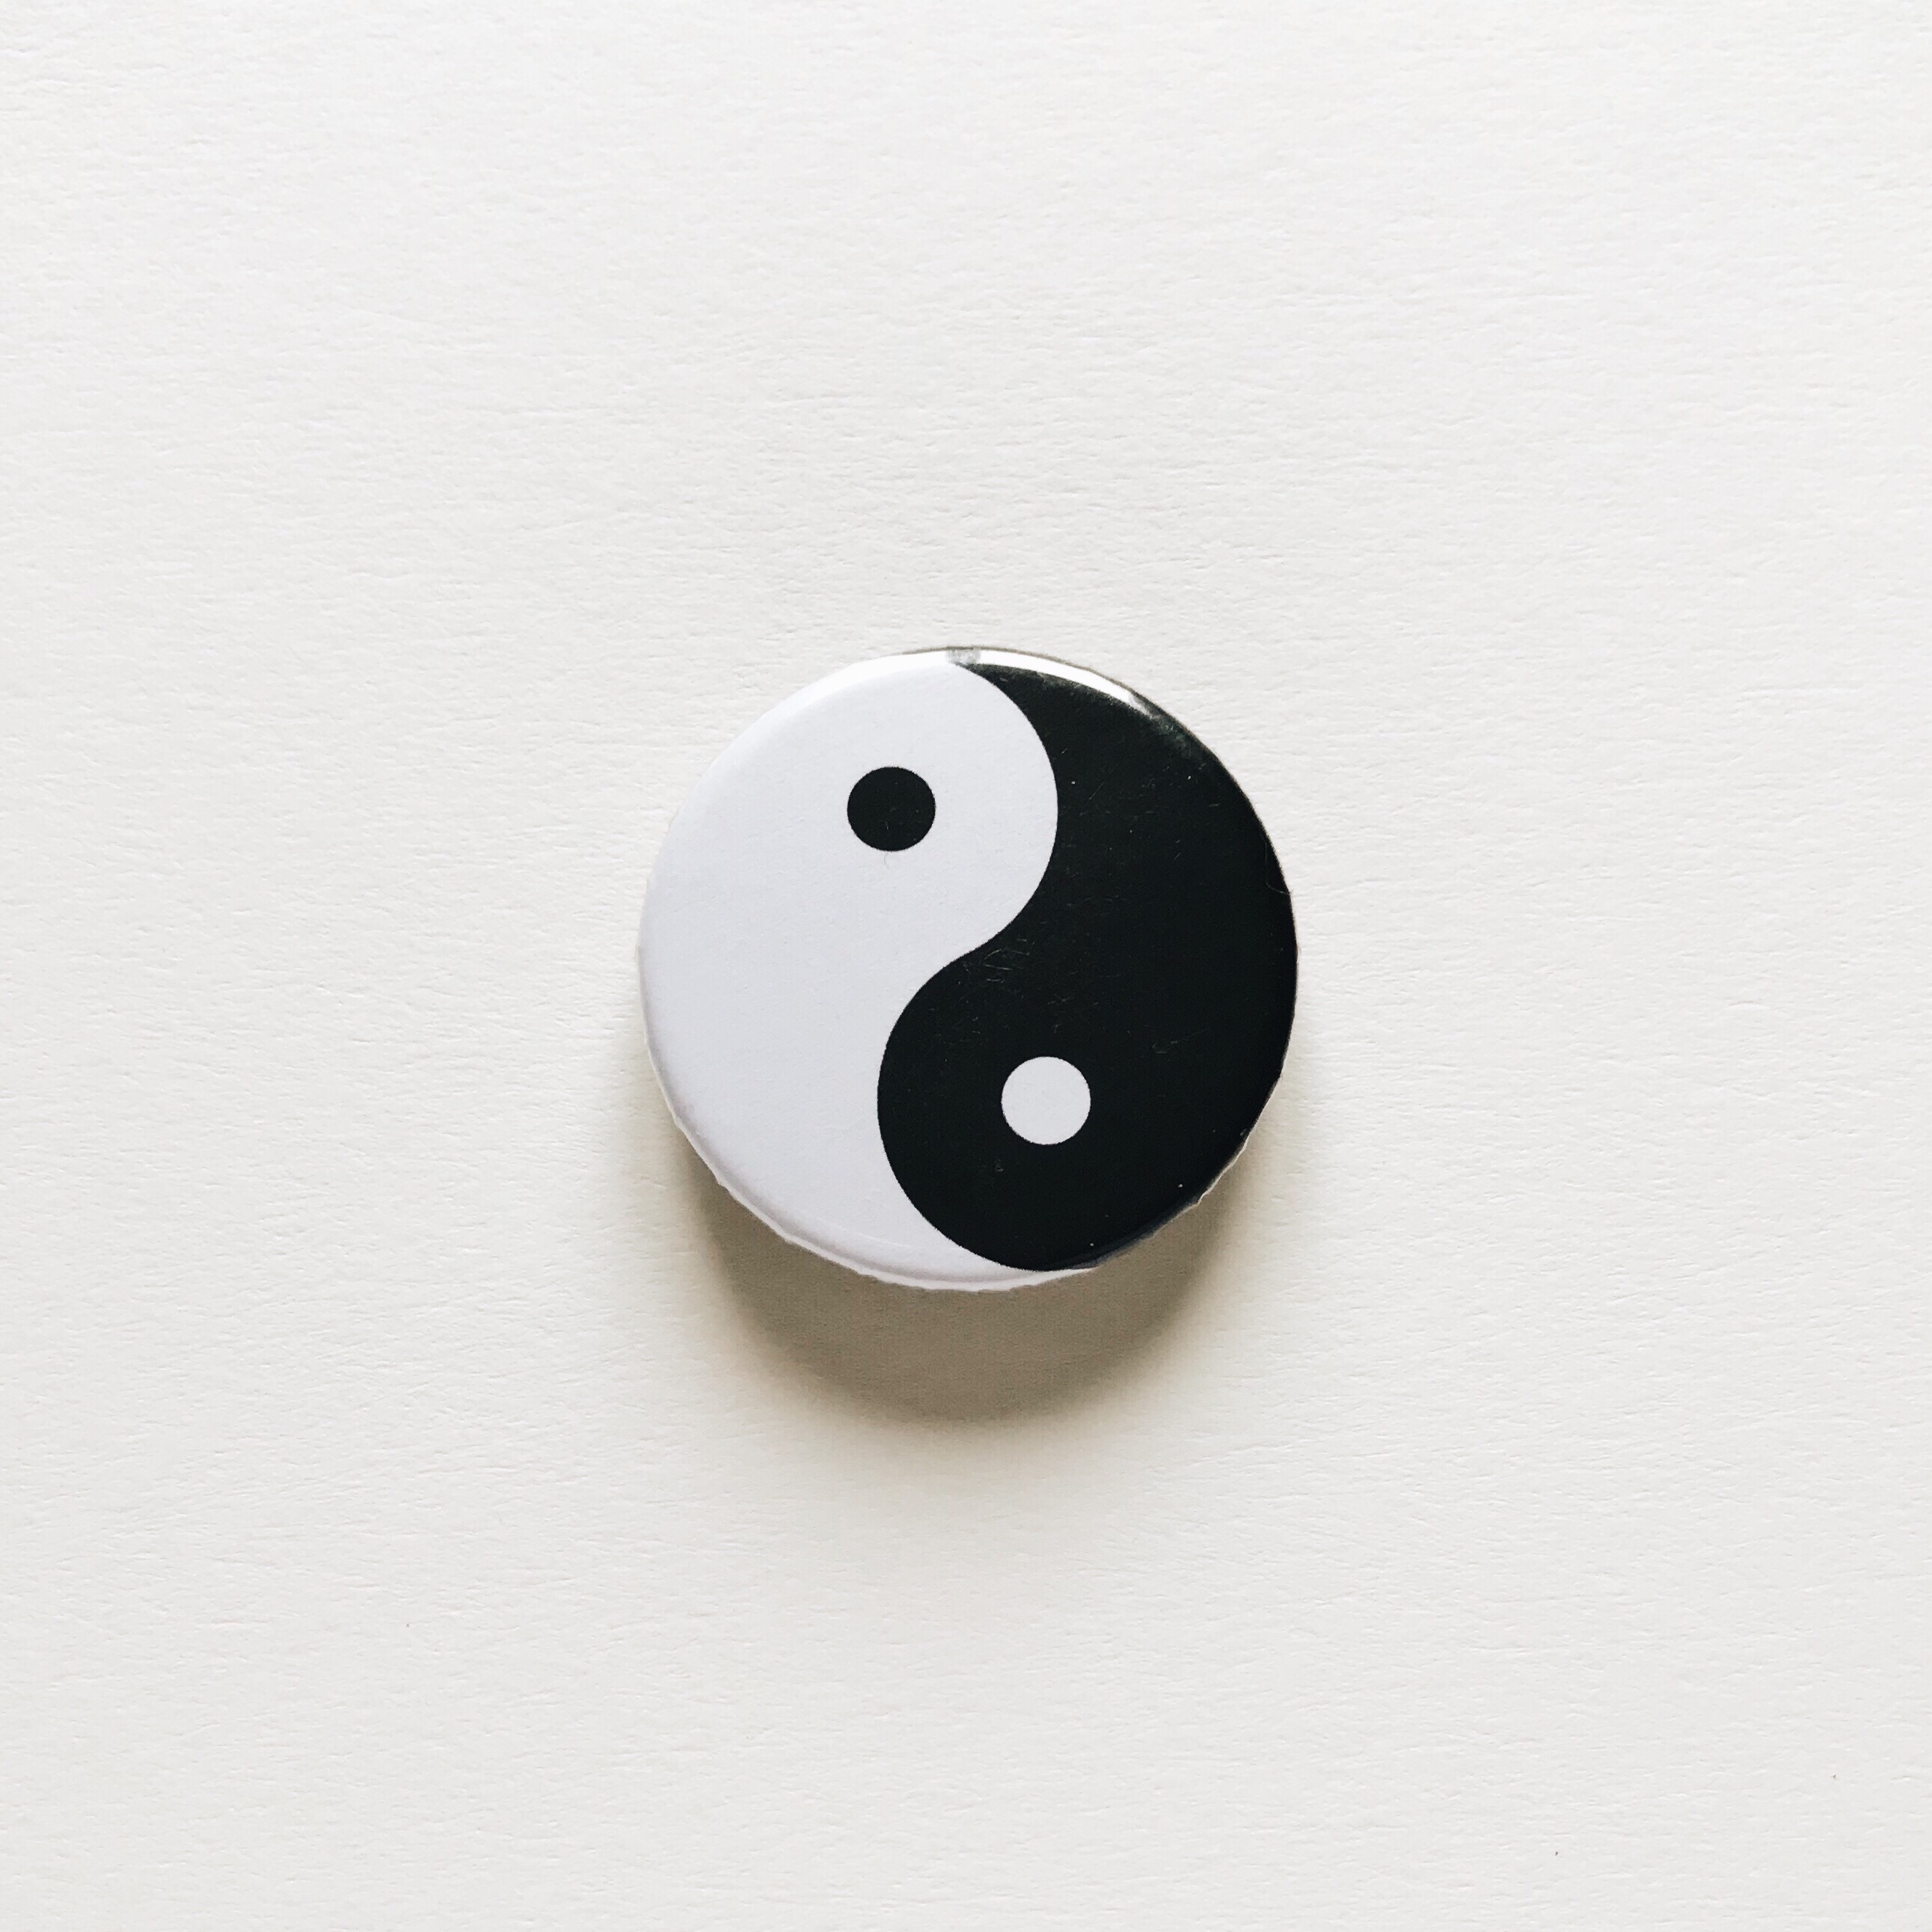 Privacy vs. Security – Why Can’t We All Just Get Along? Top 5 Approaches to Yin/Yang Privacy & Security